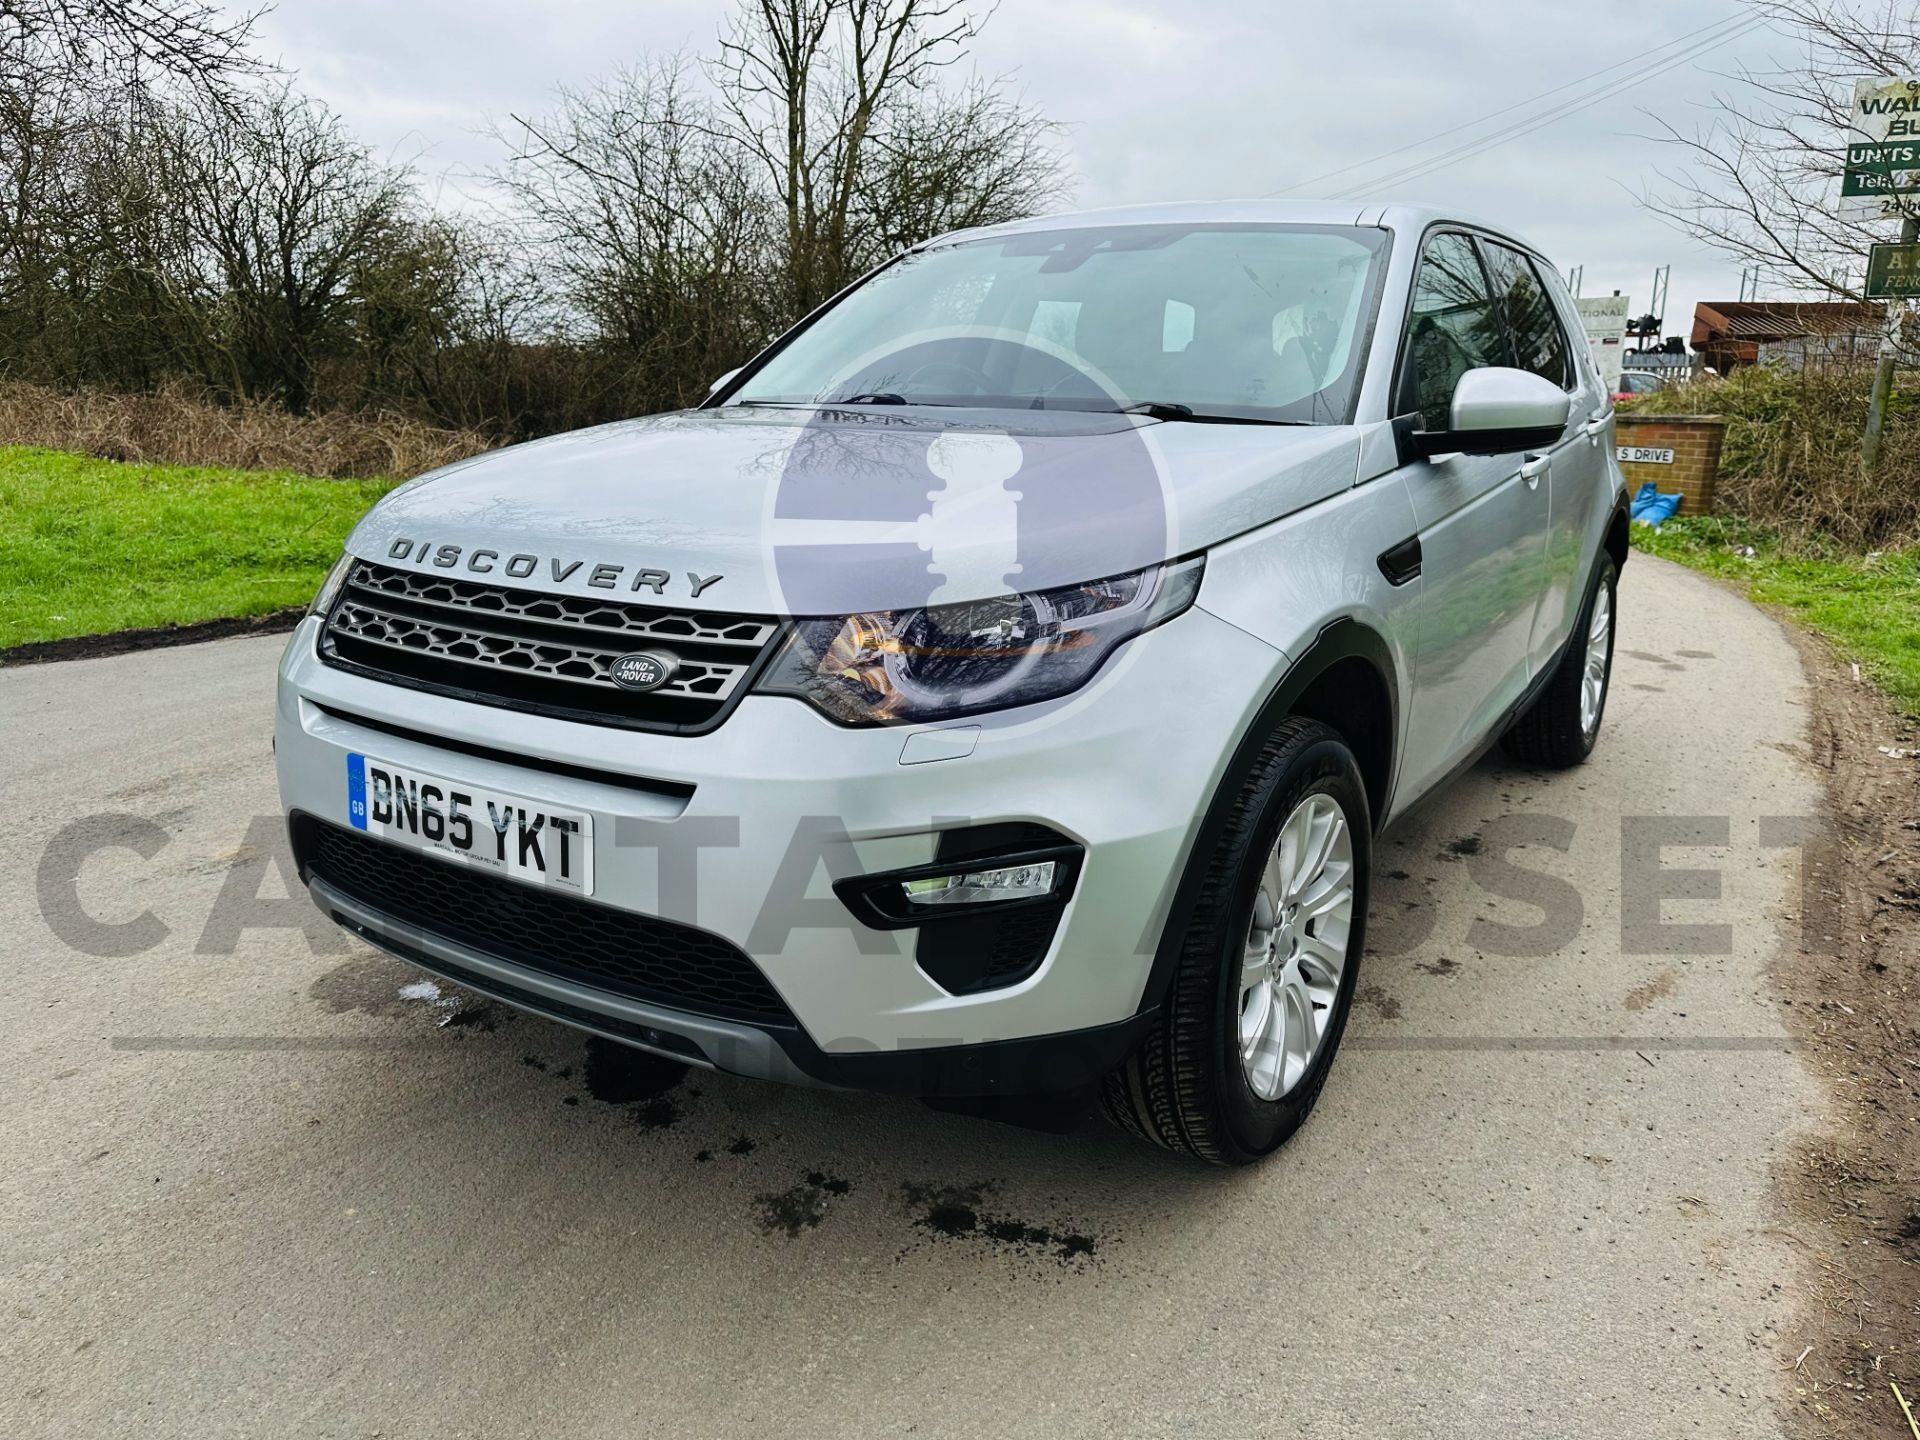 LAND ROVER DISCOVERY SPORT *SE TECH* 7 SEATER SUV (65 REG - EURO 6) 2.0 TD4 - AUTOMATIC - Image 4 of 38